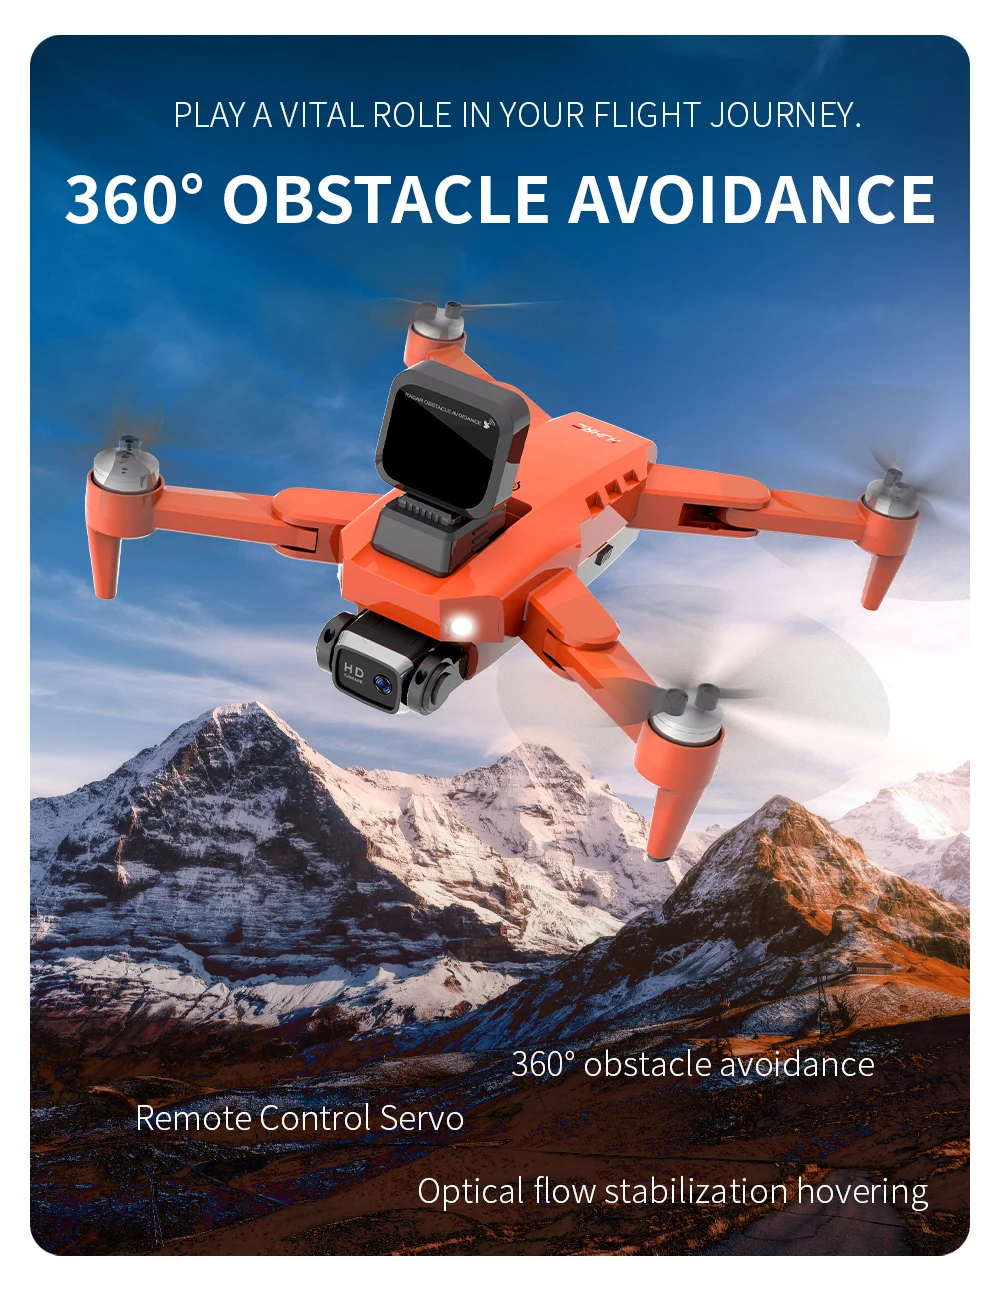 HJ40 Drone, 3609 OBSTACLE AVOIDANCE Remote Control Servo Optical flow